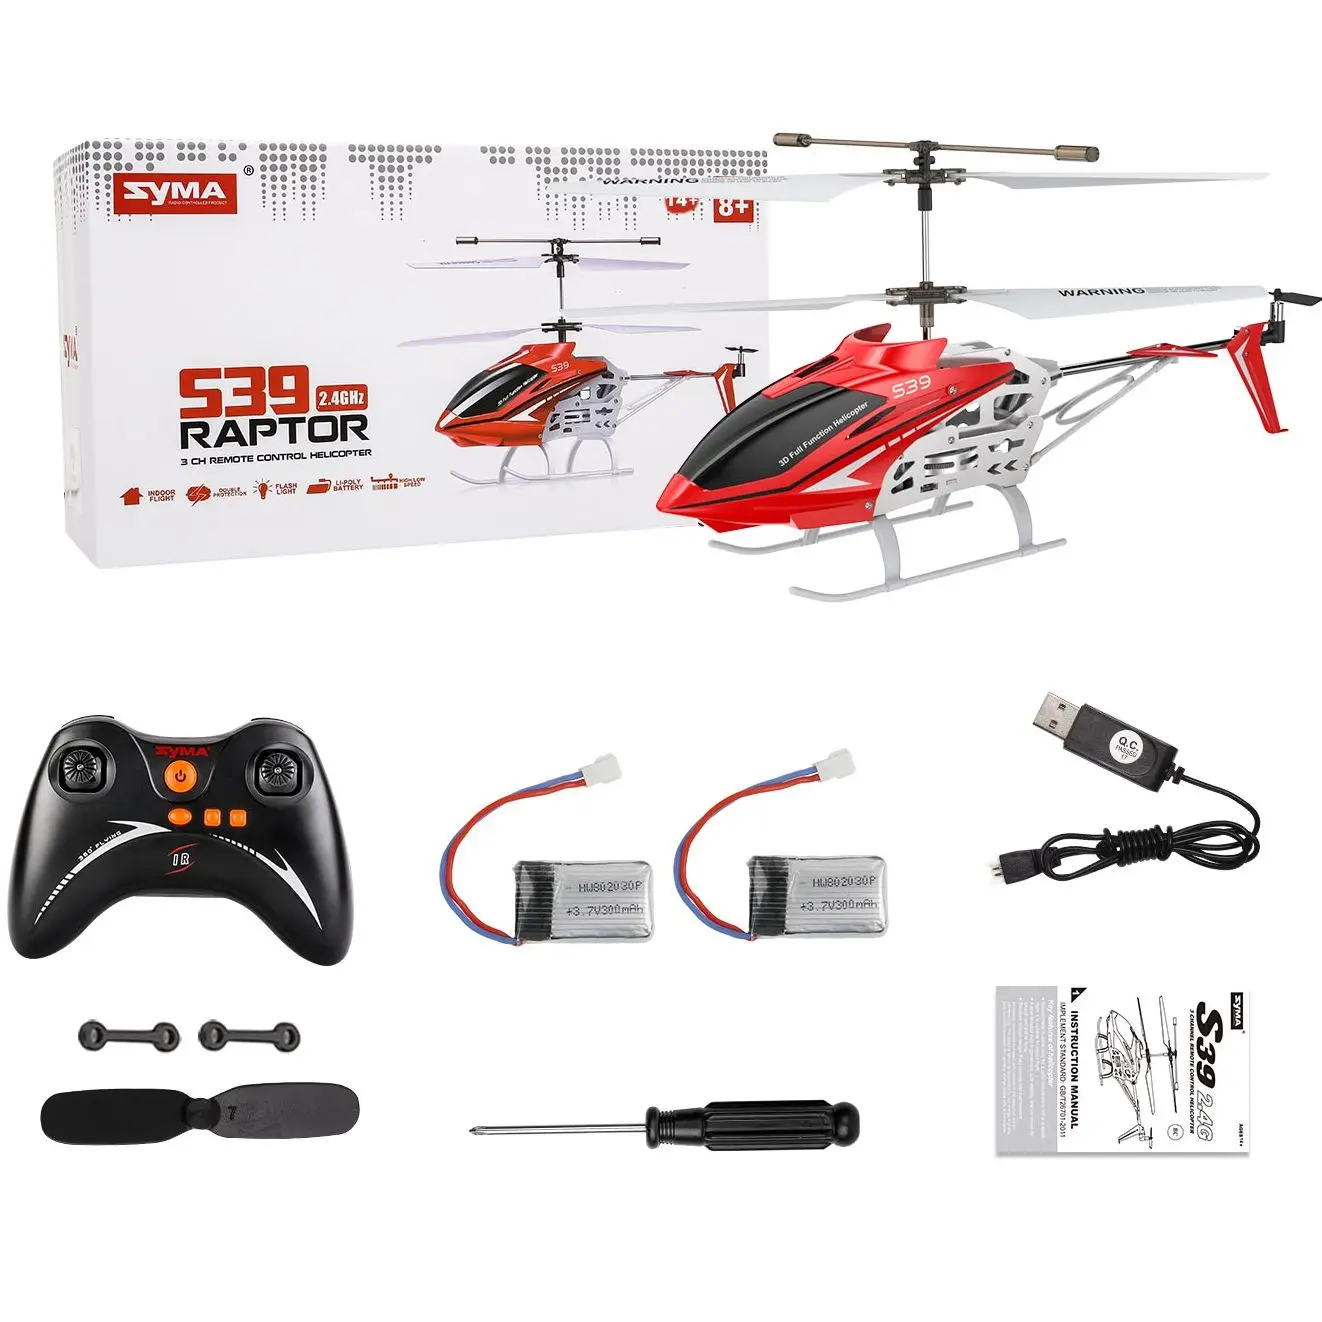 SYMA RC Helicopter S39 Aircraft with 3.5 Channel Bigger Size Sturdy Alloy Material Gyro Stabilizer and High&Low Speed Drone enlarge